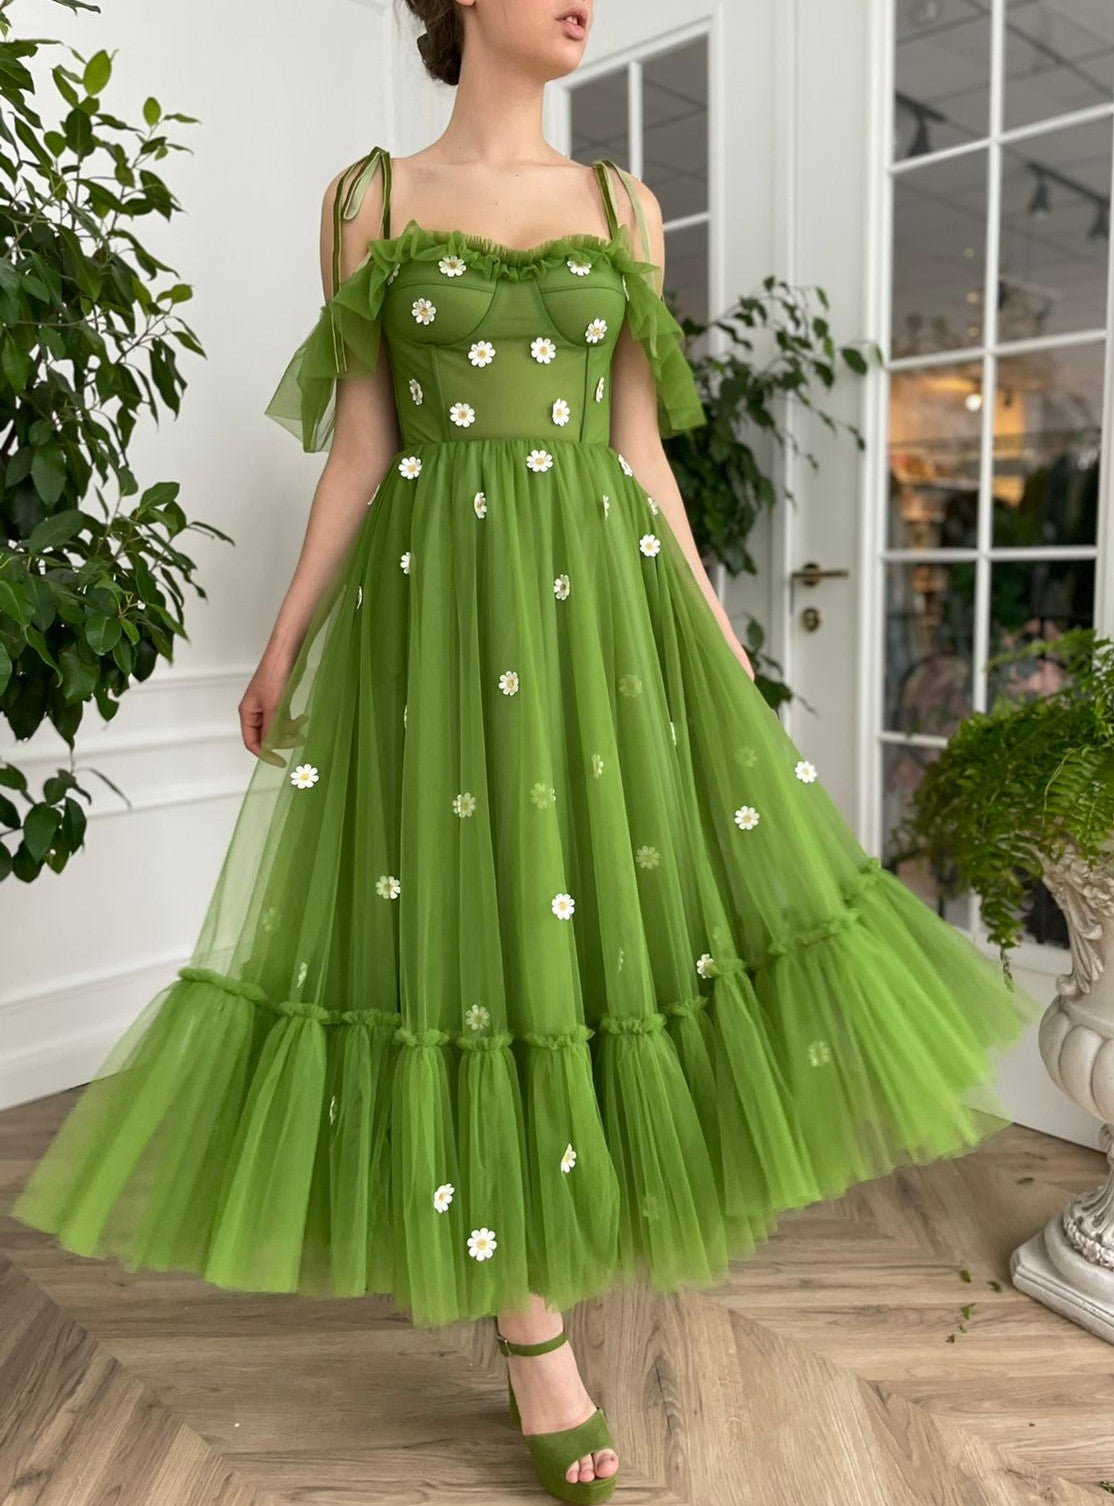 Green midi dress with spaghetti straps, off the shoulder sleeves and embroidered daisies